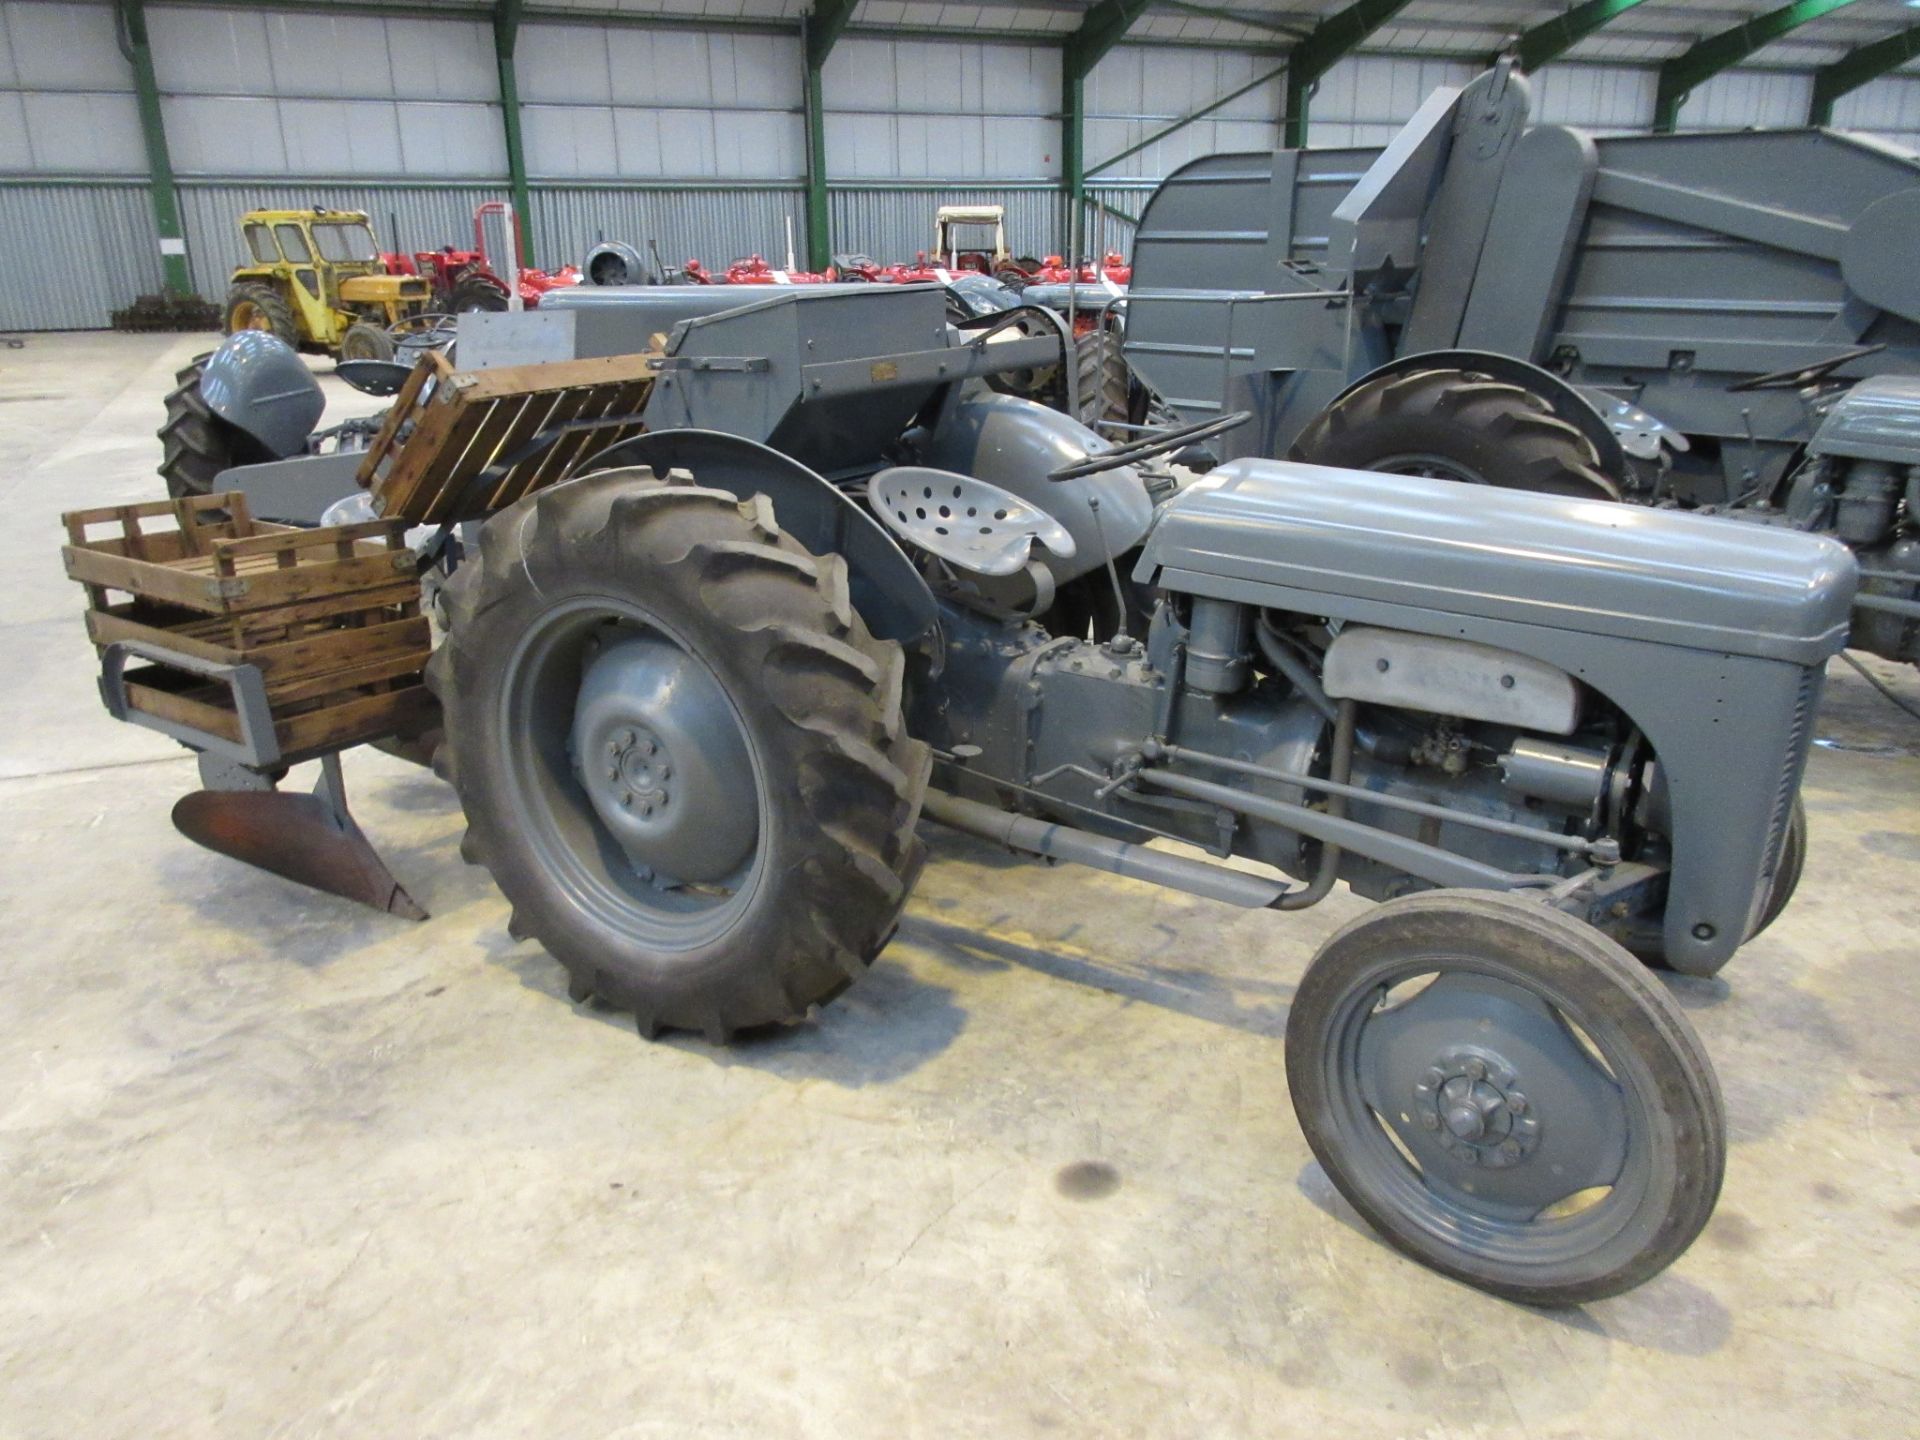 FERGUSON TE-D20 4cylinder petrol/paraffin TRACTOR Reg No: 462 XUD Serial No: N/A Another